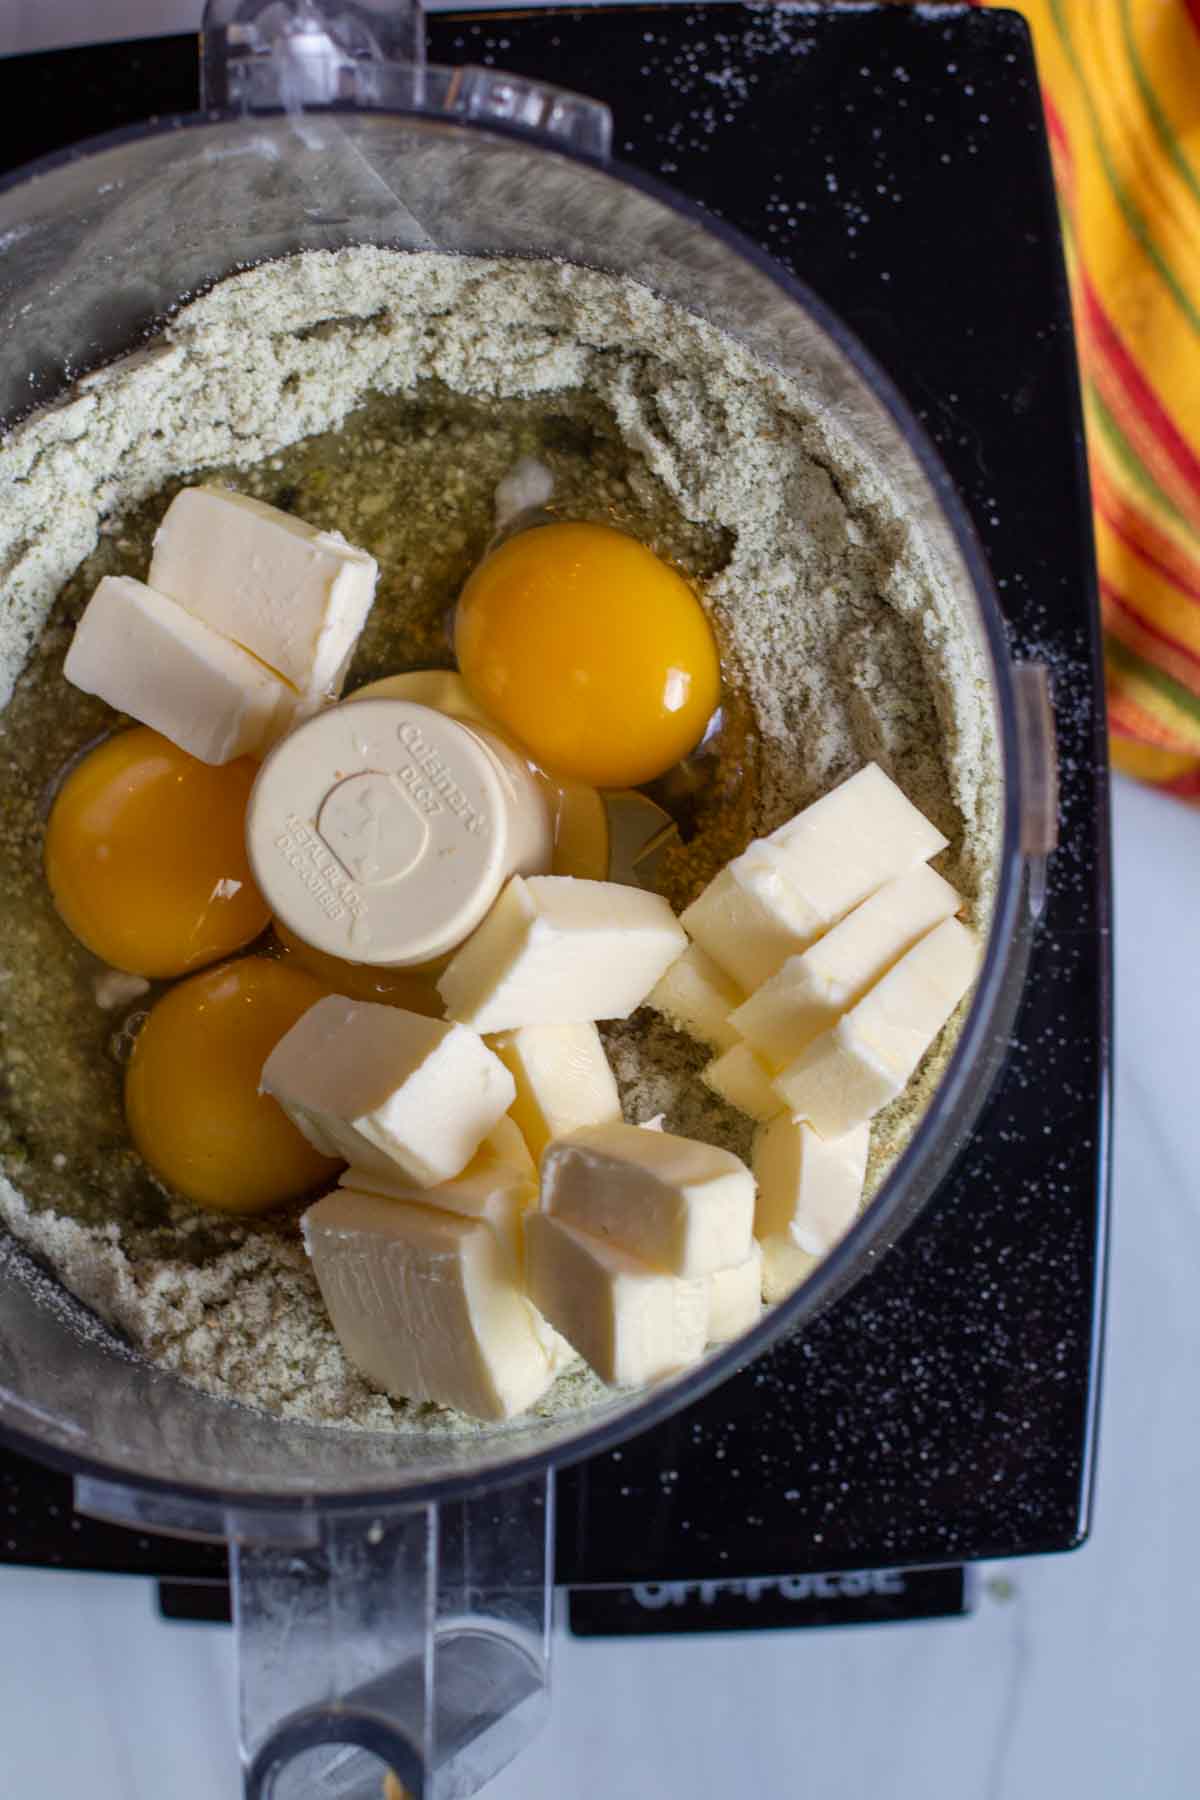 Adding butter and eggs to make a batter for Mexican Chocolate Cake.